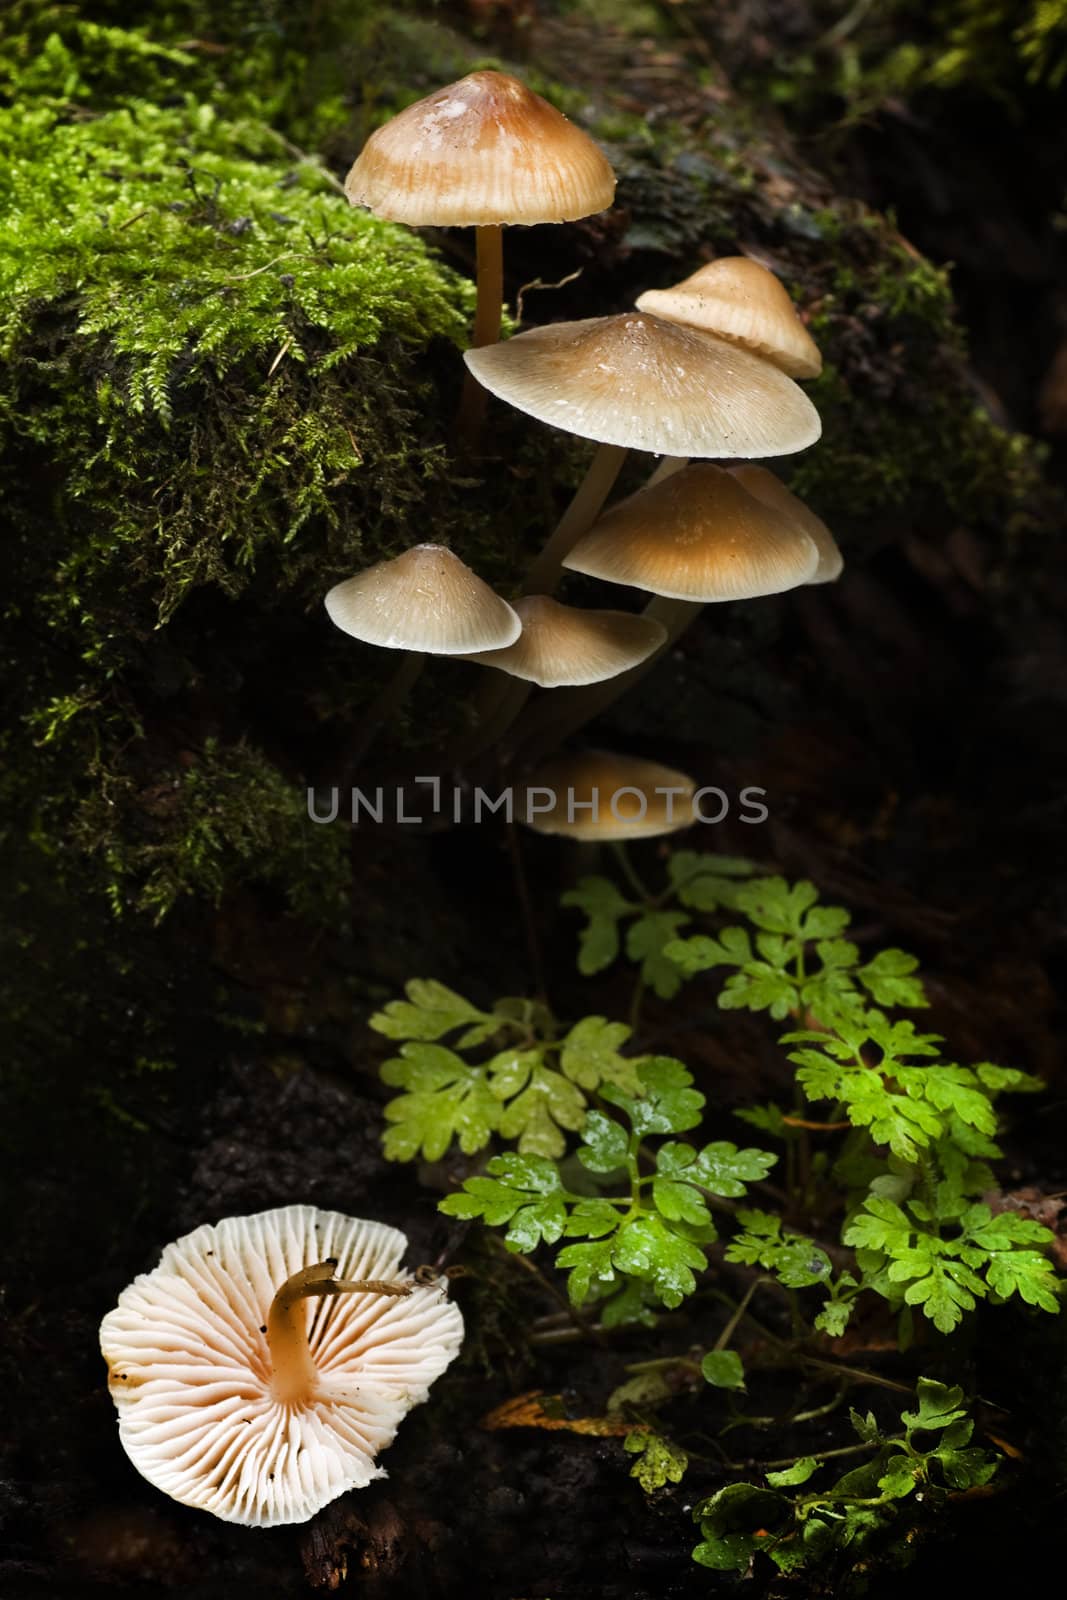 Small group of mushrooms in fall by Colette